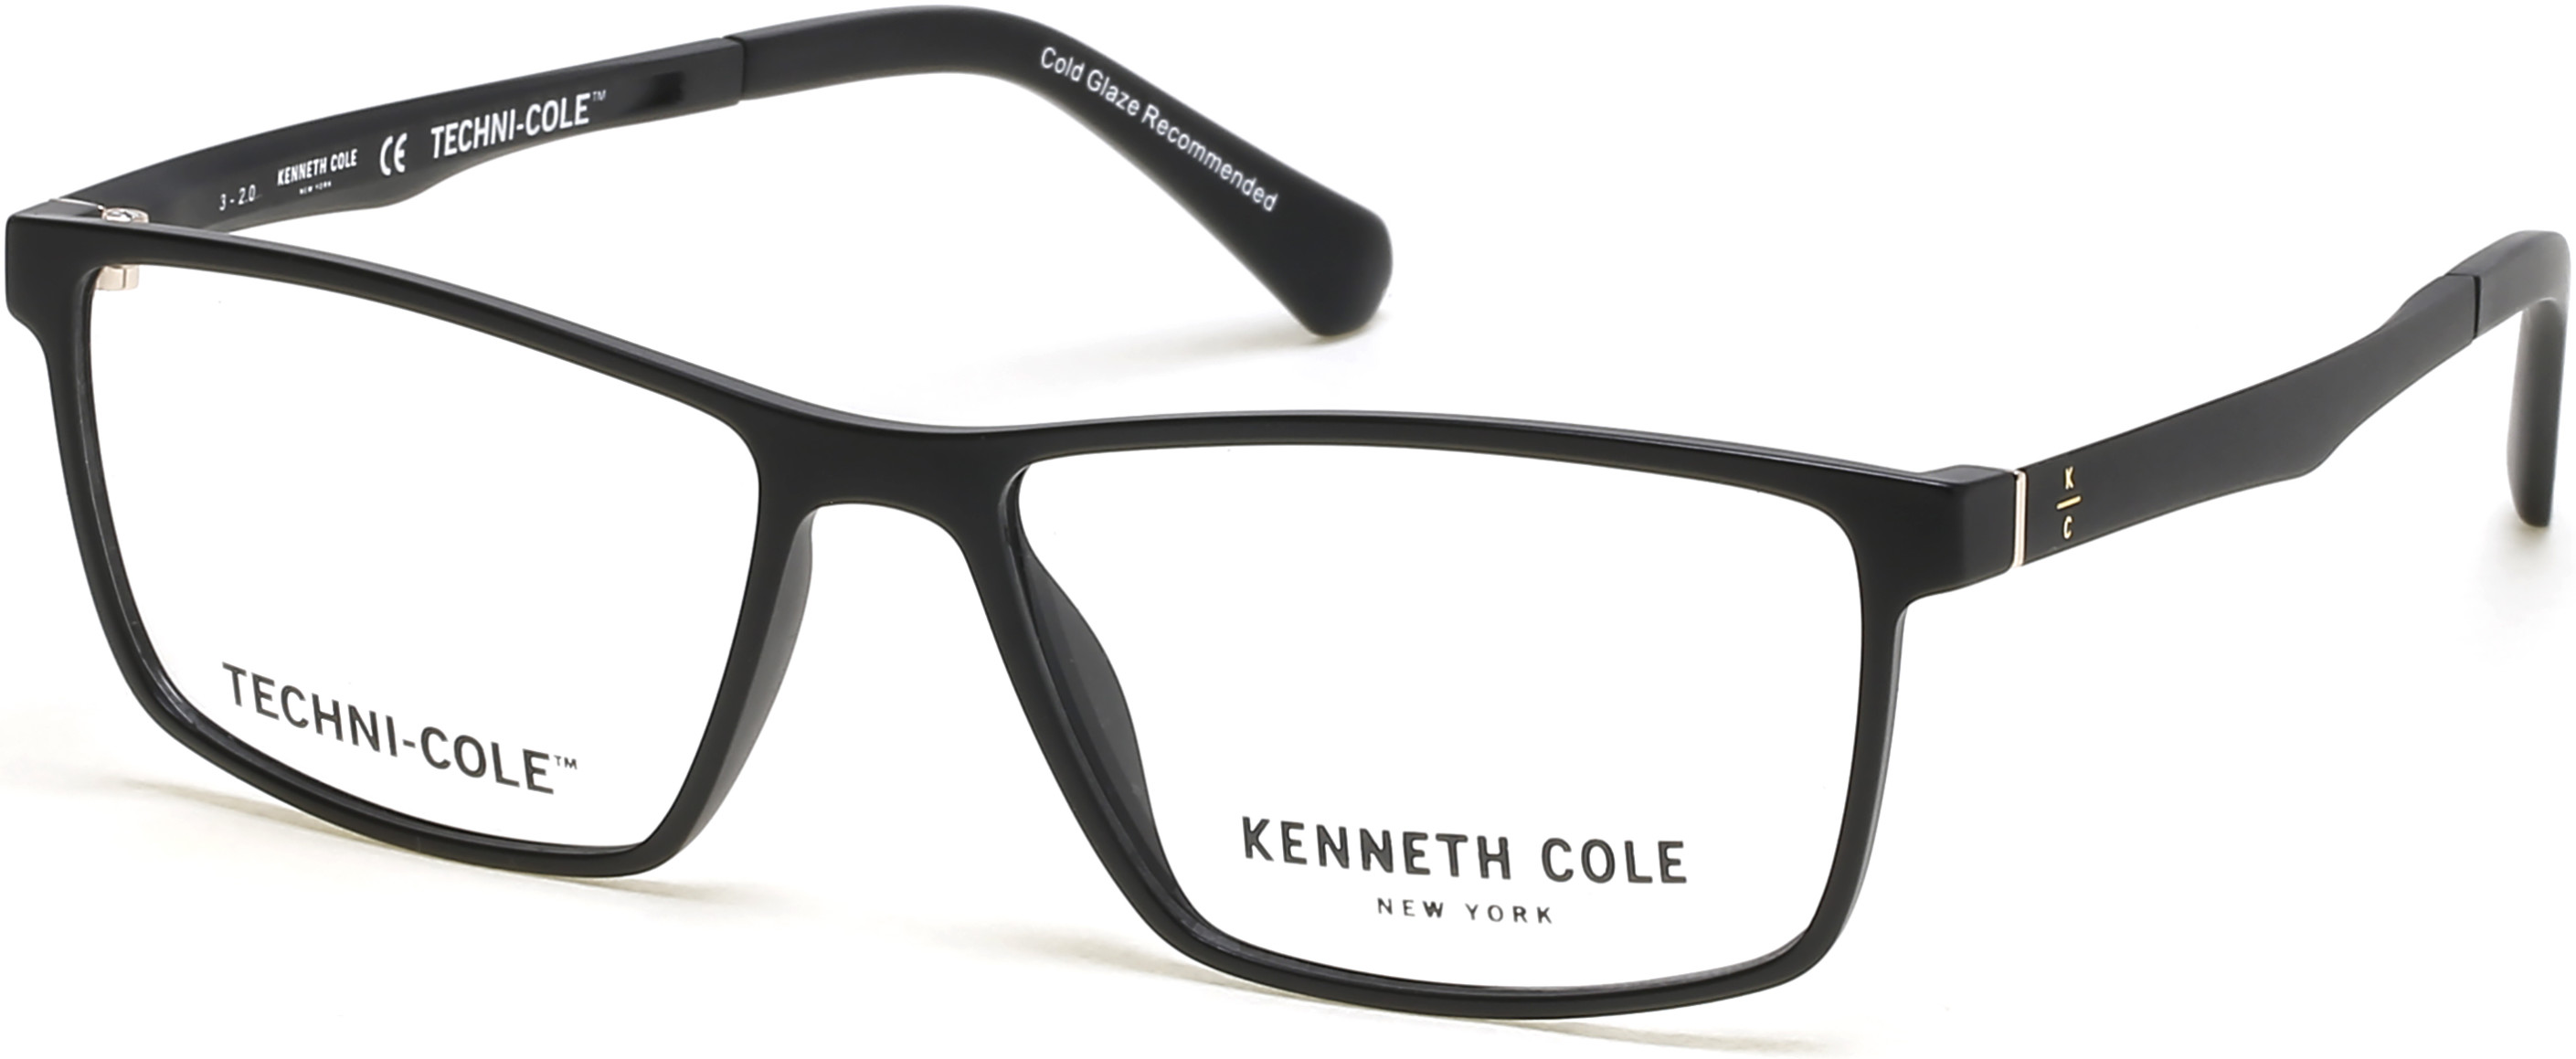 KENNETH COLE NY 0318